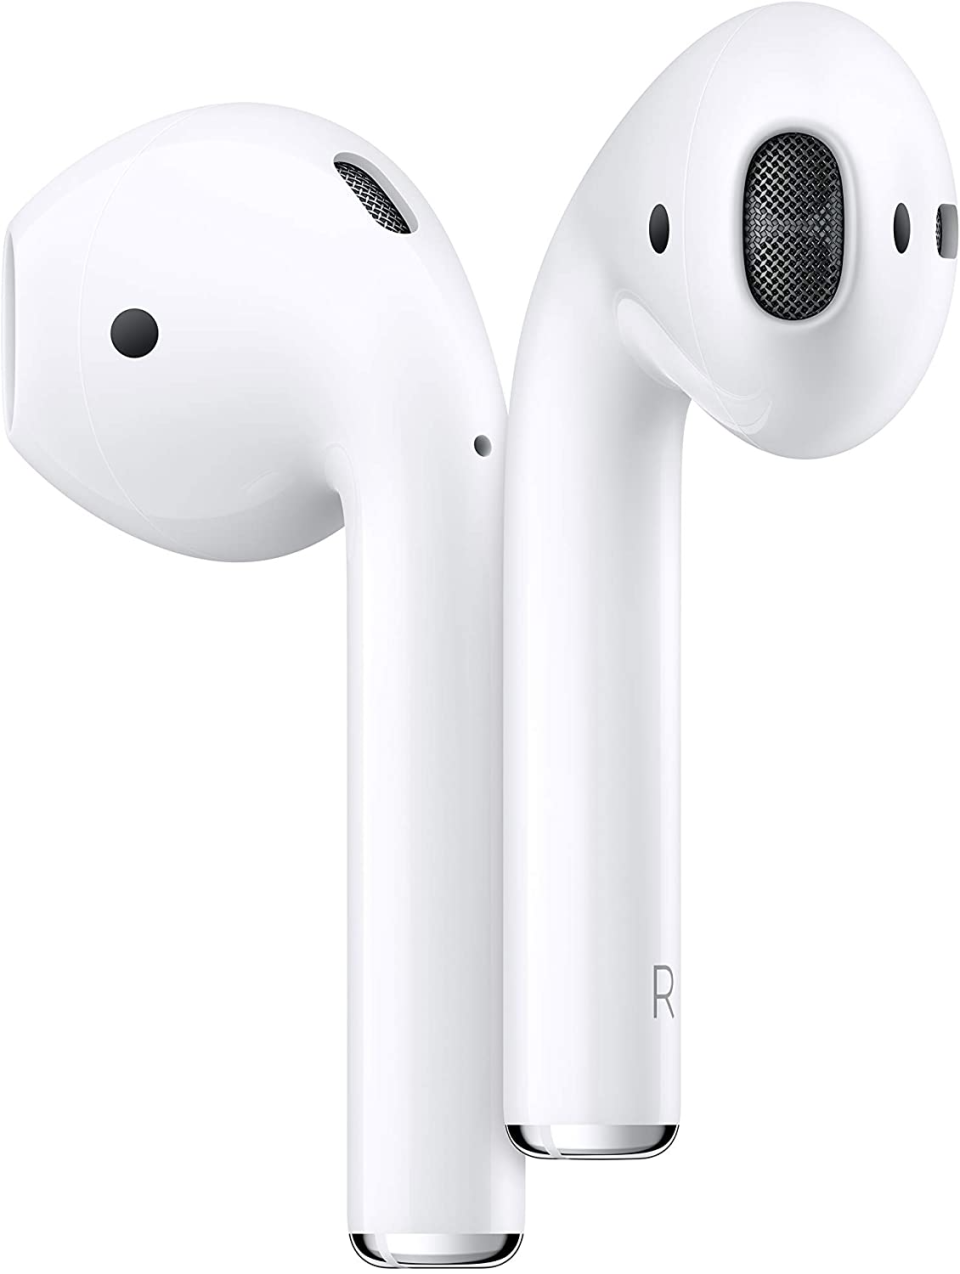 Apple AirPods Second Generation Amazon